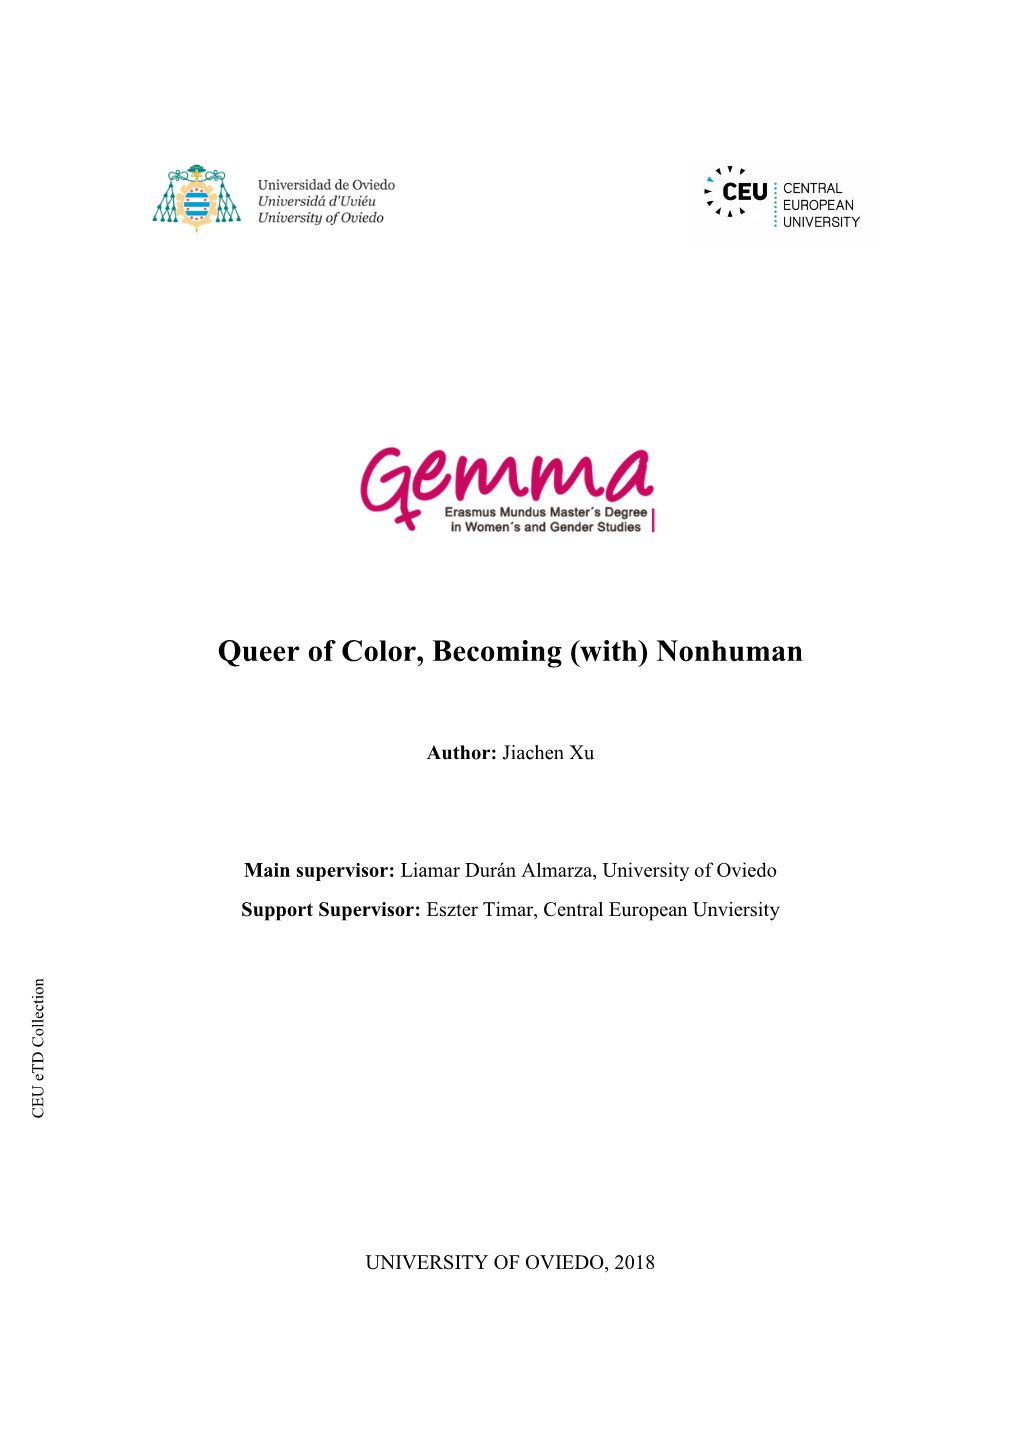 Queer of Color, Becoming (With) Nonhuman